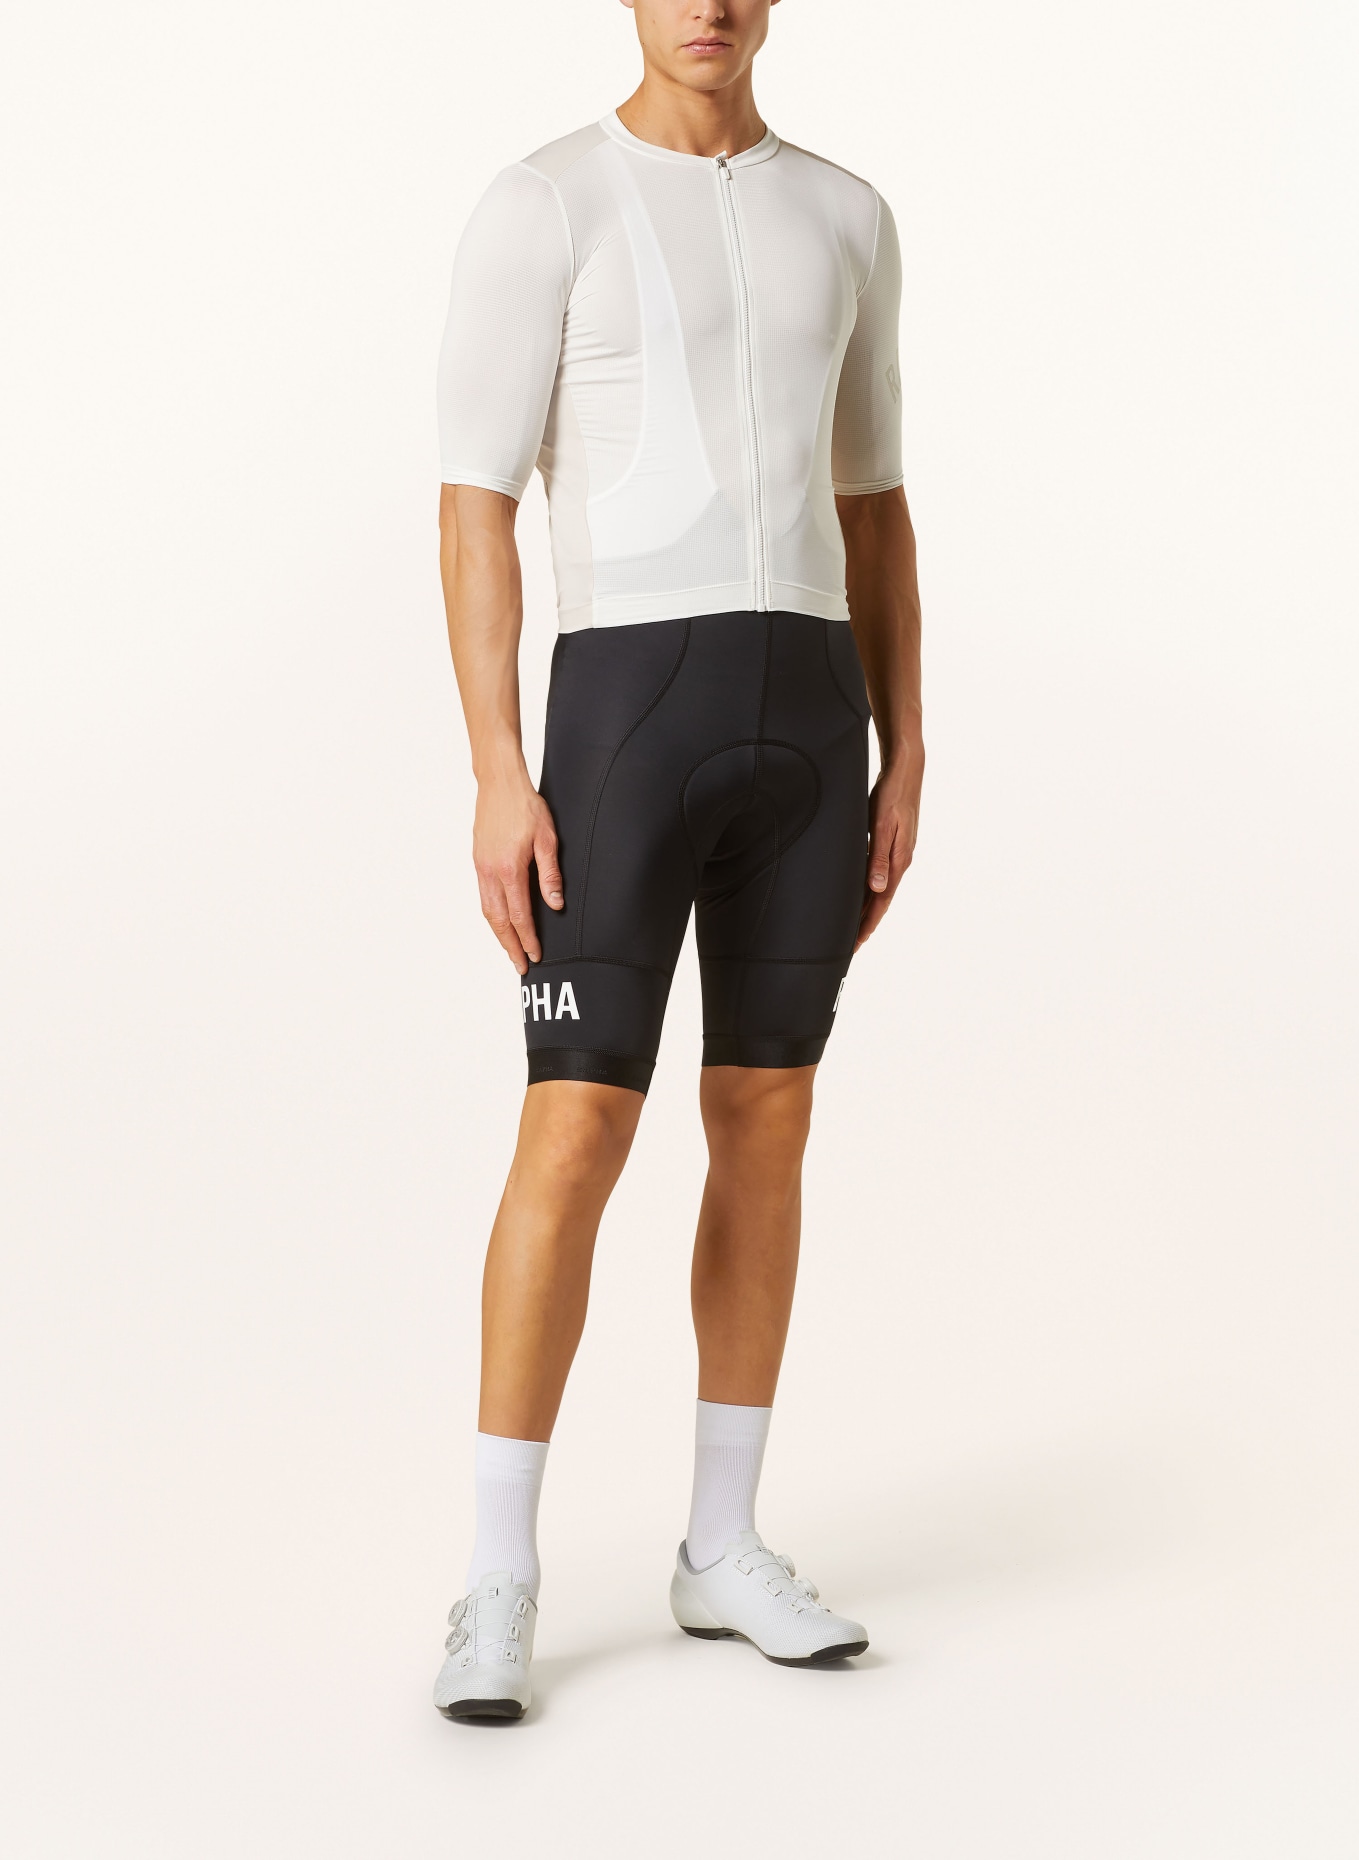 Rapha Cycling jersey PRO TEAM, Color: LIGHT BROWN/ WHITE (Image 2)